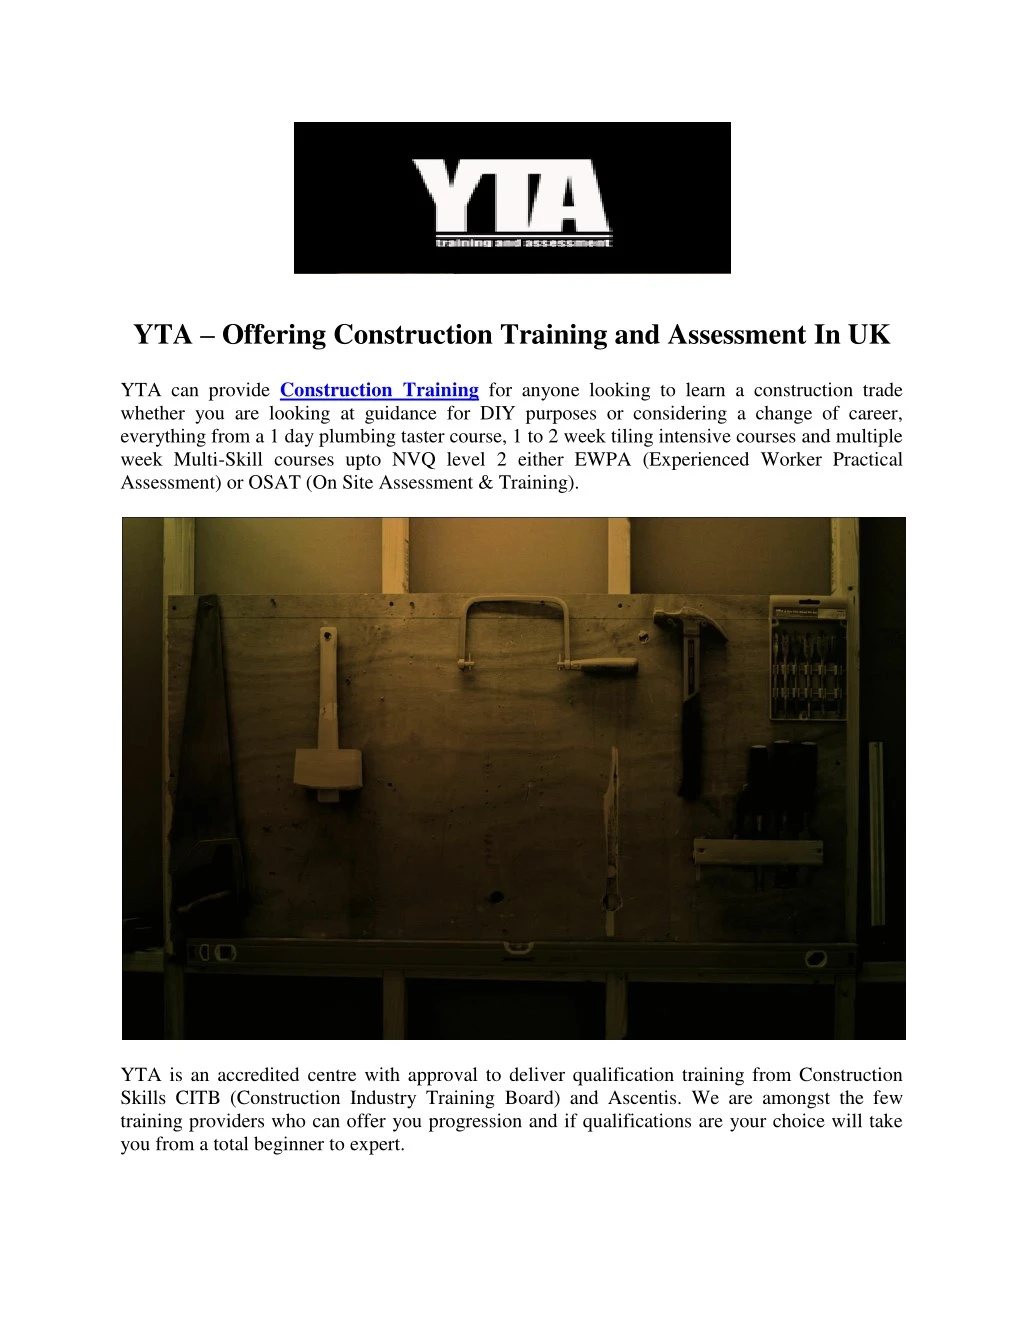 yta offering construction training and assessment